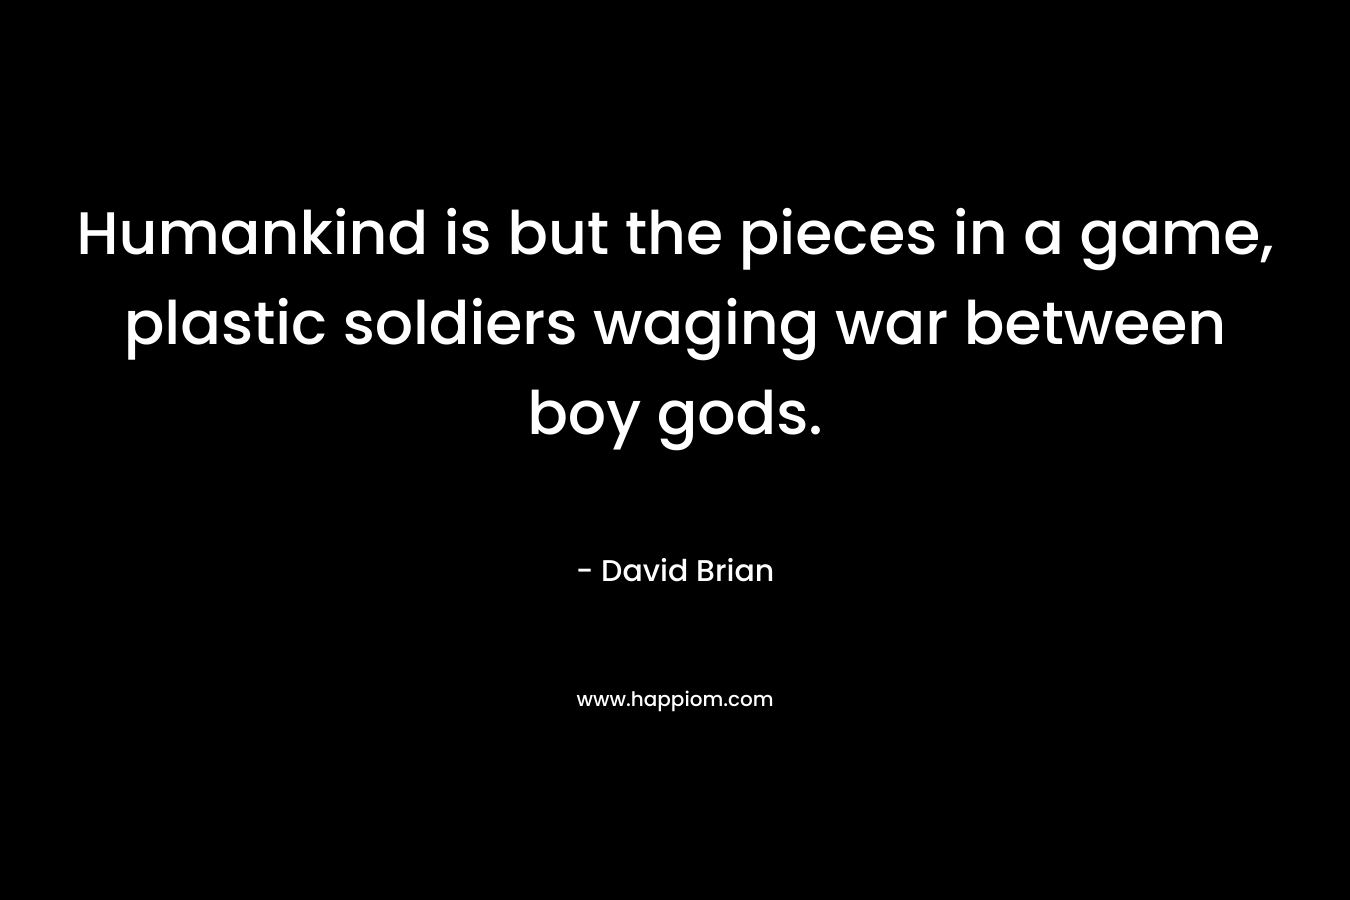 Humankind is but the pieces in a game, plastic soldiers waging war between boy gods.